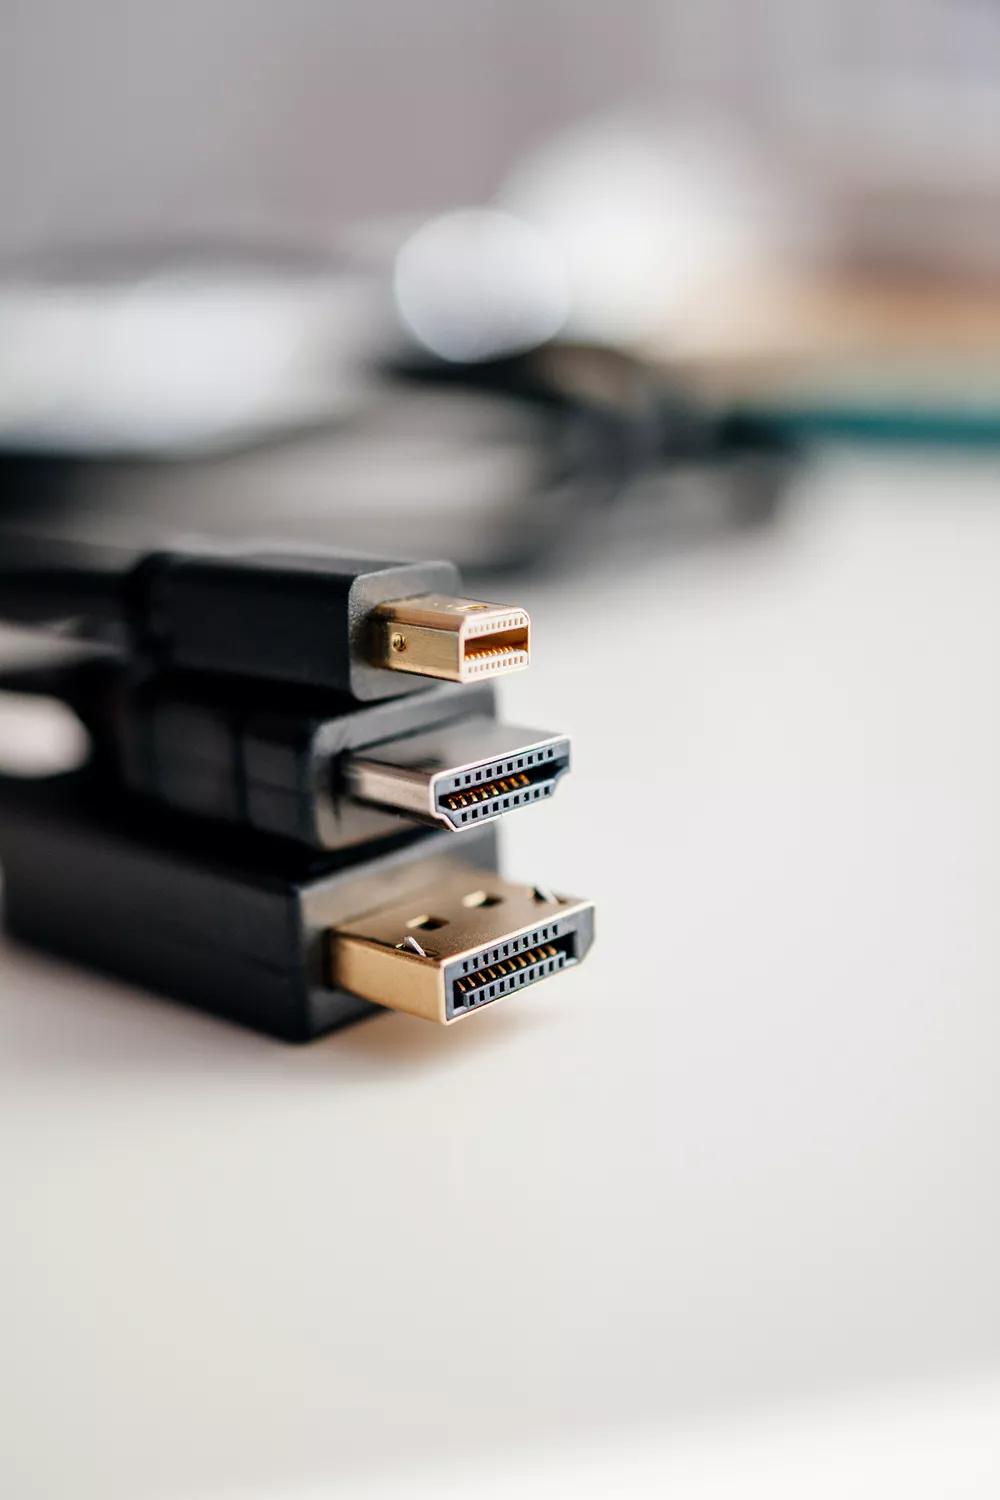 What do you need to test in DisplayPort interface?